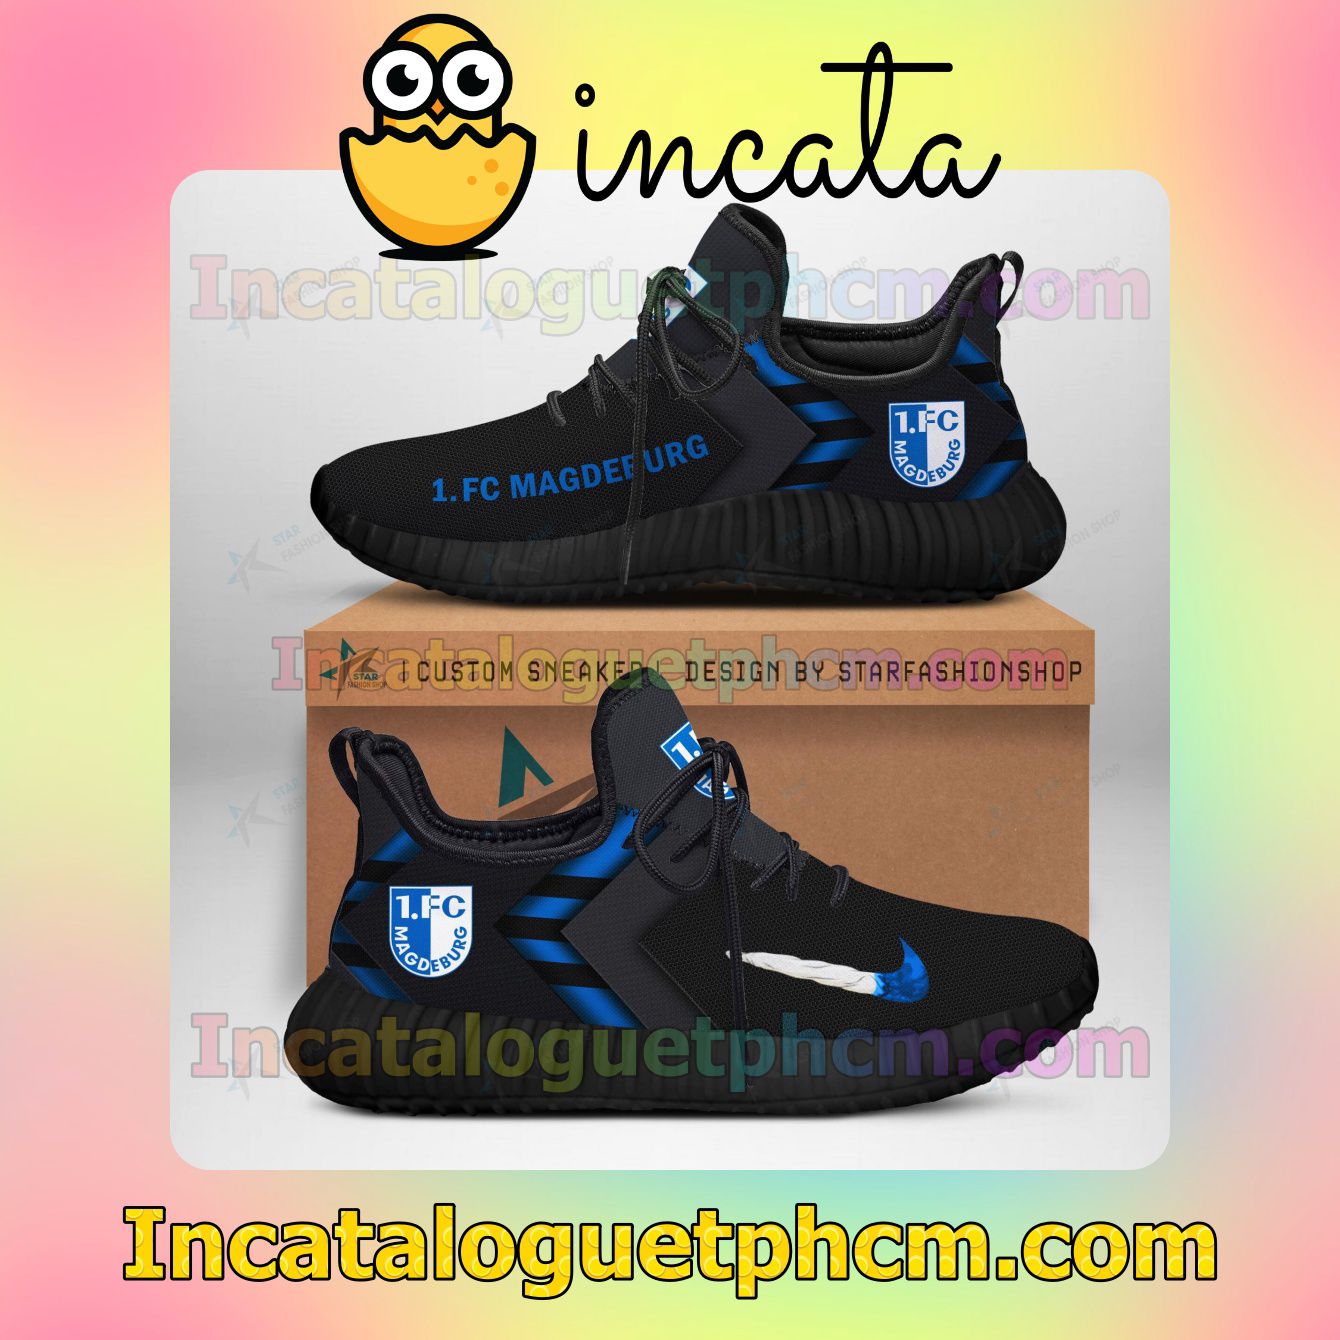 Popular 1. FC Magdeburg Ultraboost Yeezy Shoes Sneakers